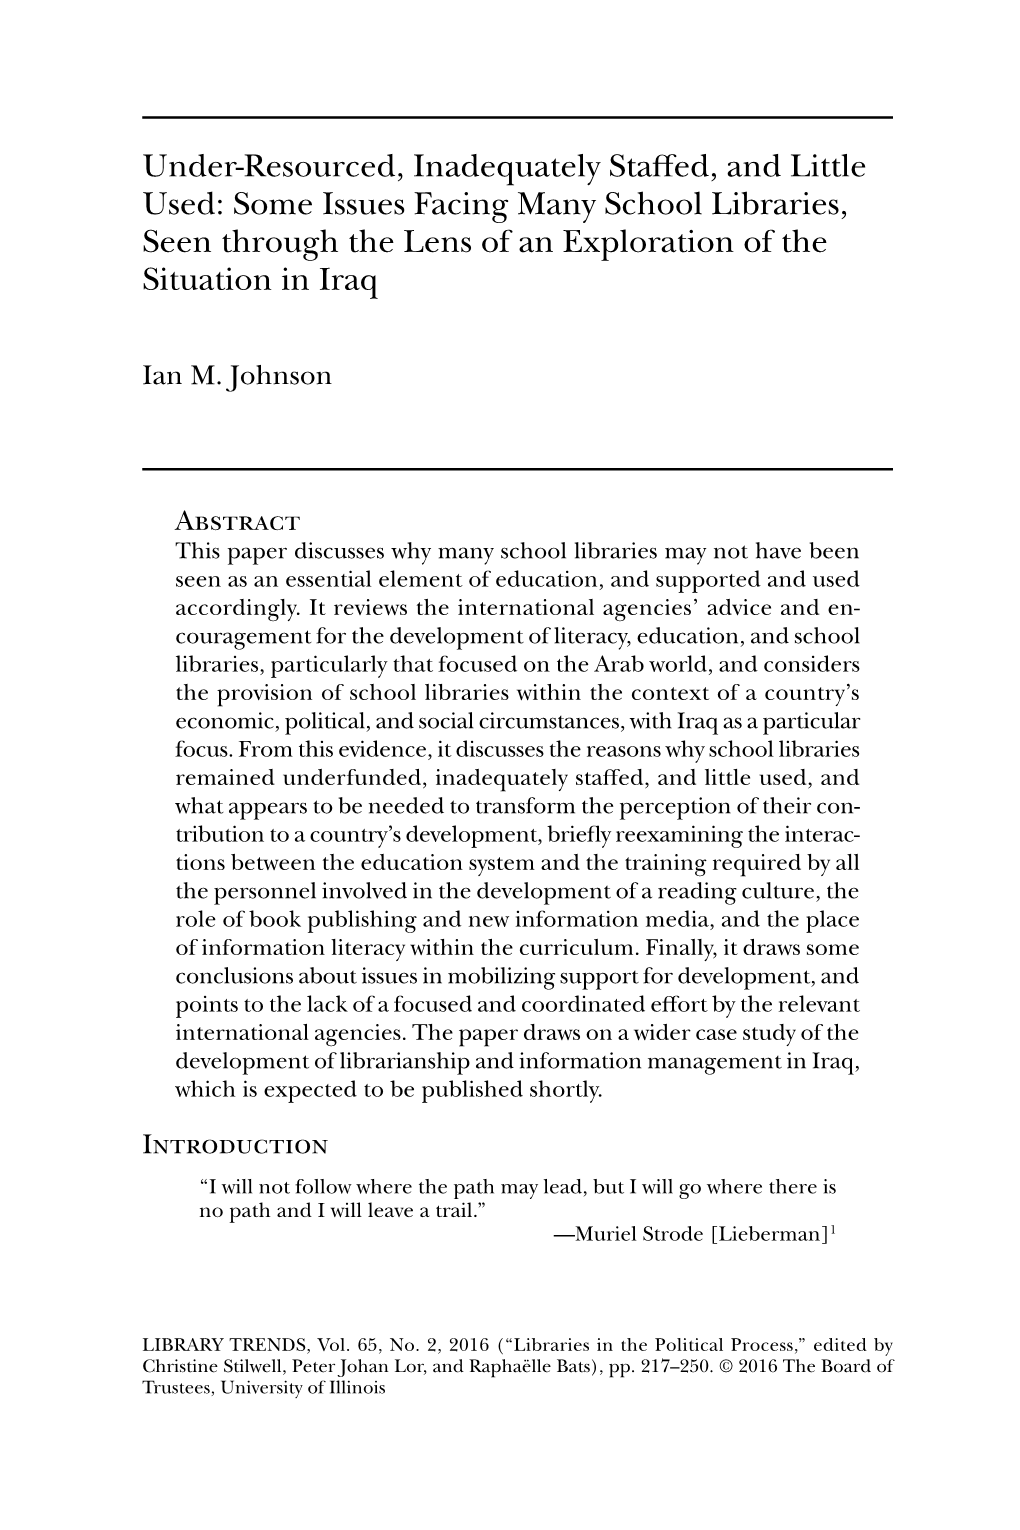 Some Issues Facing Many School Libraries, Seen Through the Lens of an Exploration of the Situation in Iraq